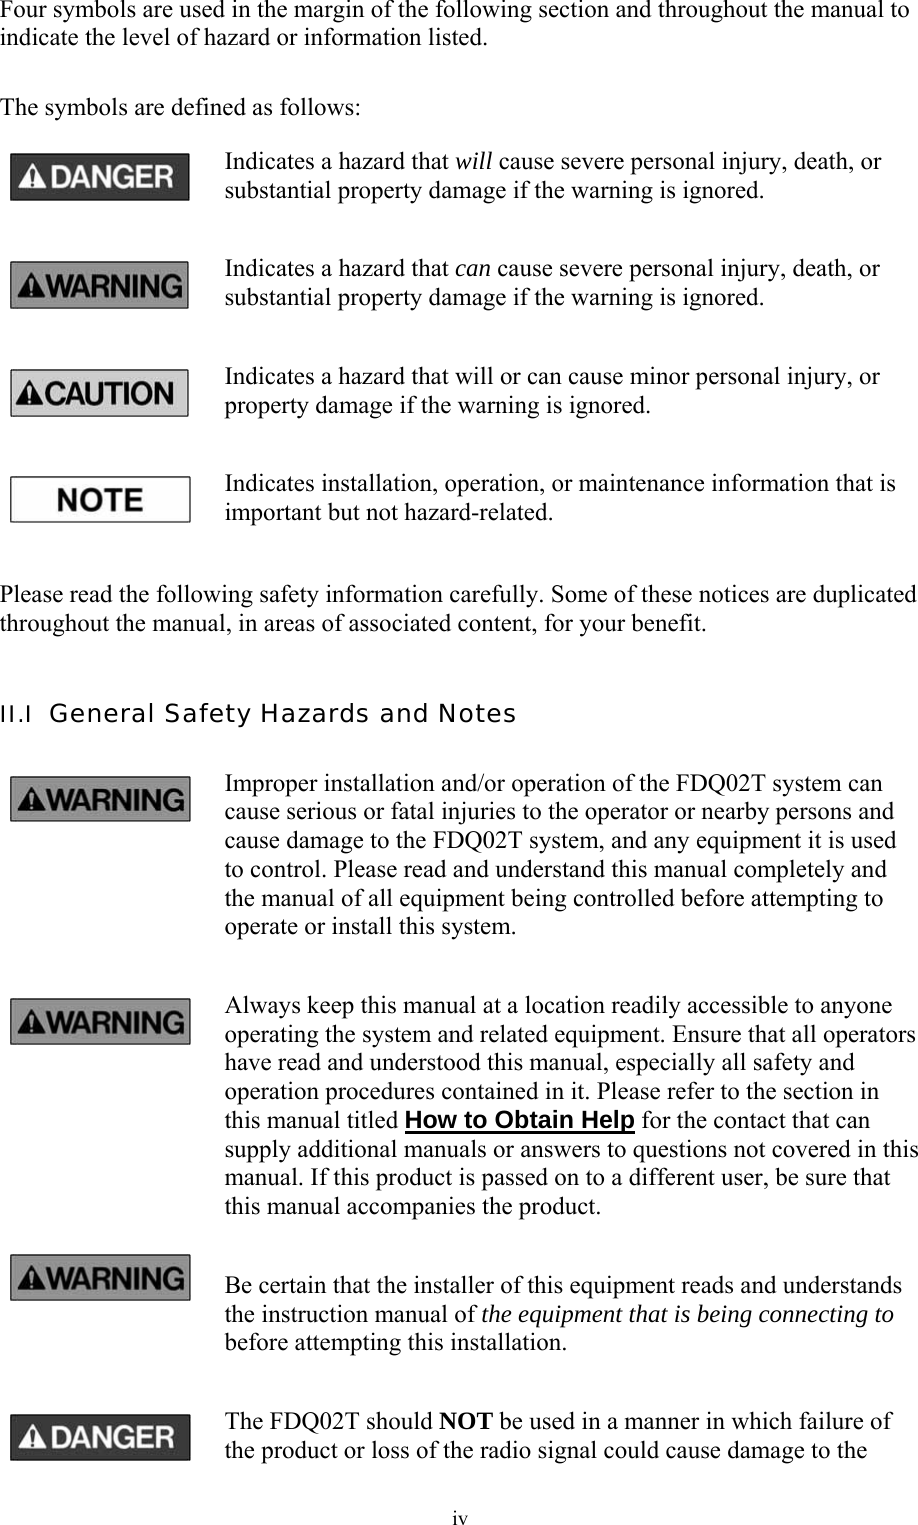  ivFour symbols are used in the margin of the following section and throughout the manual to indicate the level of hazard or information listed.  The symbols are defined as follows: Indicates a hazard that will cause severe personal injury, death, or substantial property damage if the warning is ignored. Indicates a hazard that can cause severe personal injury, death, or substantial property damage if the warning is ignored. Indicates a hazard that will or can cause minor personal injury, or property damage if the warning is ignored. Indicates installation, operation, or maintenance information that is important but not hazard-related.  Please read the following safety information carefully. Some of these notices are duplicated throughout the manual, in areas of associated content, for your benefit.  II.I  General Safety Hazards and Notes Improper installation and/or operation of the FDQ02T system can cause serious or fatal injuries to the operator or nearby persons and cause damage to the FDQ02T system, and any equipment it is used to control. Please read and understand this manual completely and the manual of all equipment being controlled before attempting to operate or install this system. Always keep this manual at a location readily accessible to anyone operating the system and related equipment. Ensure that all operators have read and understood this manual, especially all safety and operation procedures contained in it. Please refer to the section in this manual titled How to Obtain Help for the contact that can supply additional manuals or answers to questions not covered in this manual. If this product is passed on to a different user, be sure that this manual accompanies the product. Be certain that the installer of this equipment reads and understands the instruction manual of the equipment that is being connecting to before attempting this installation. The FDQ02T should NOT be used in a manner in which failure of the product or loss of the radio signal could cause damage to the 